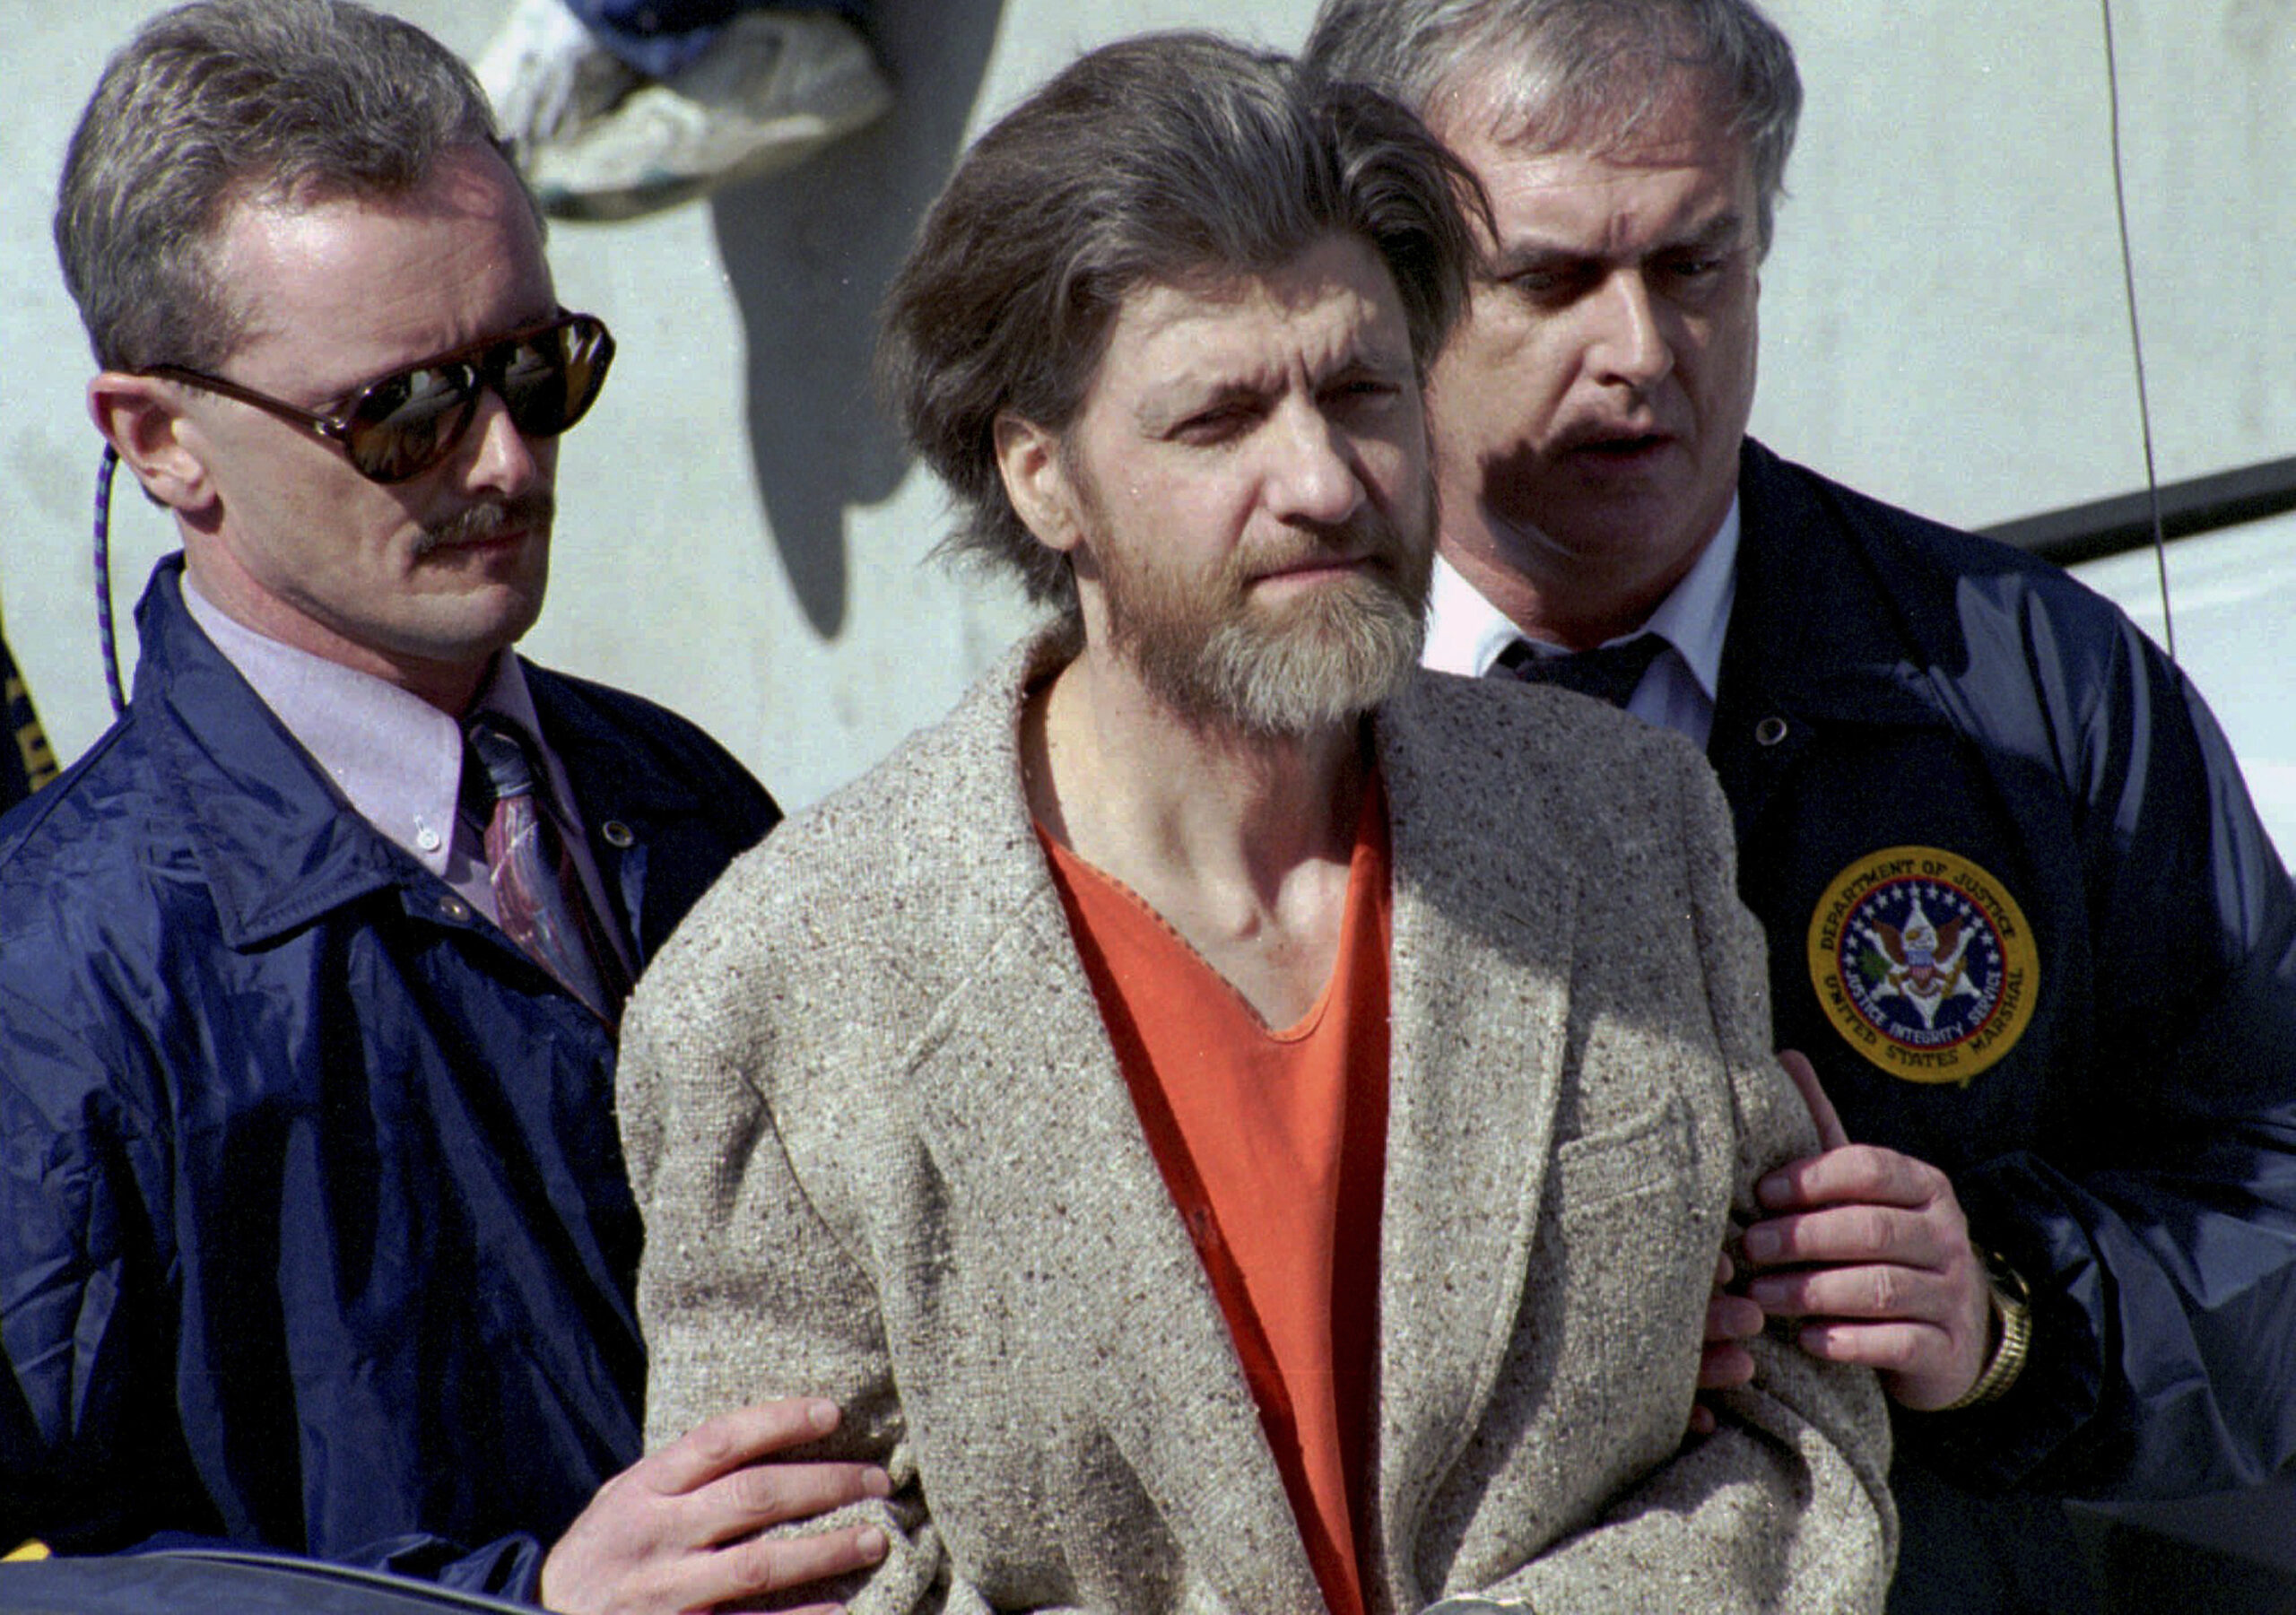 Ted Kaczynski dead: Infamous recluse known as the ‘Unabomber’ dies in prison at 81 - Washington Examiner